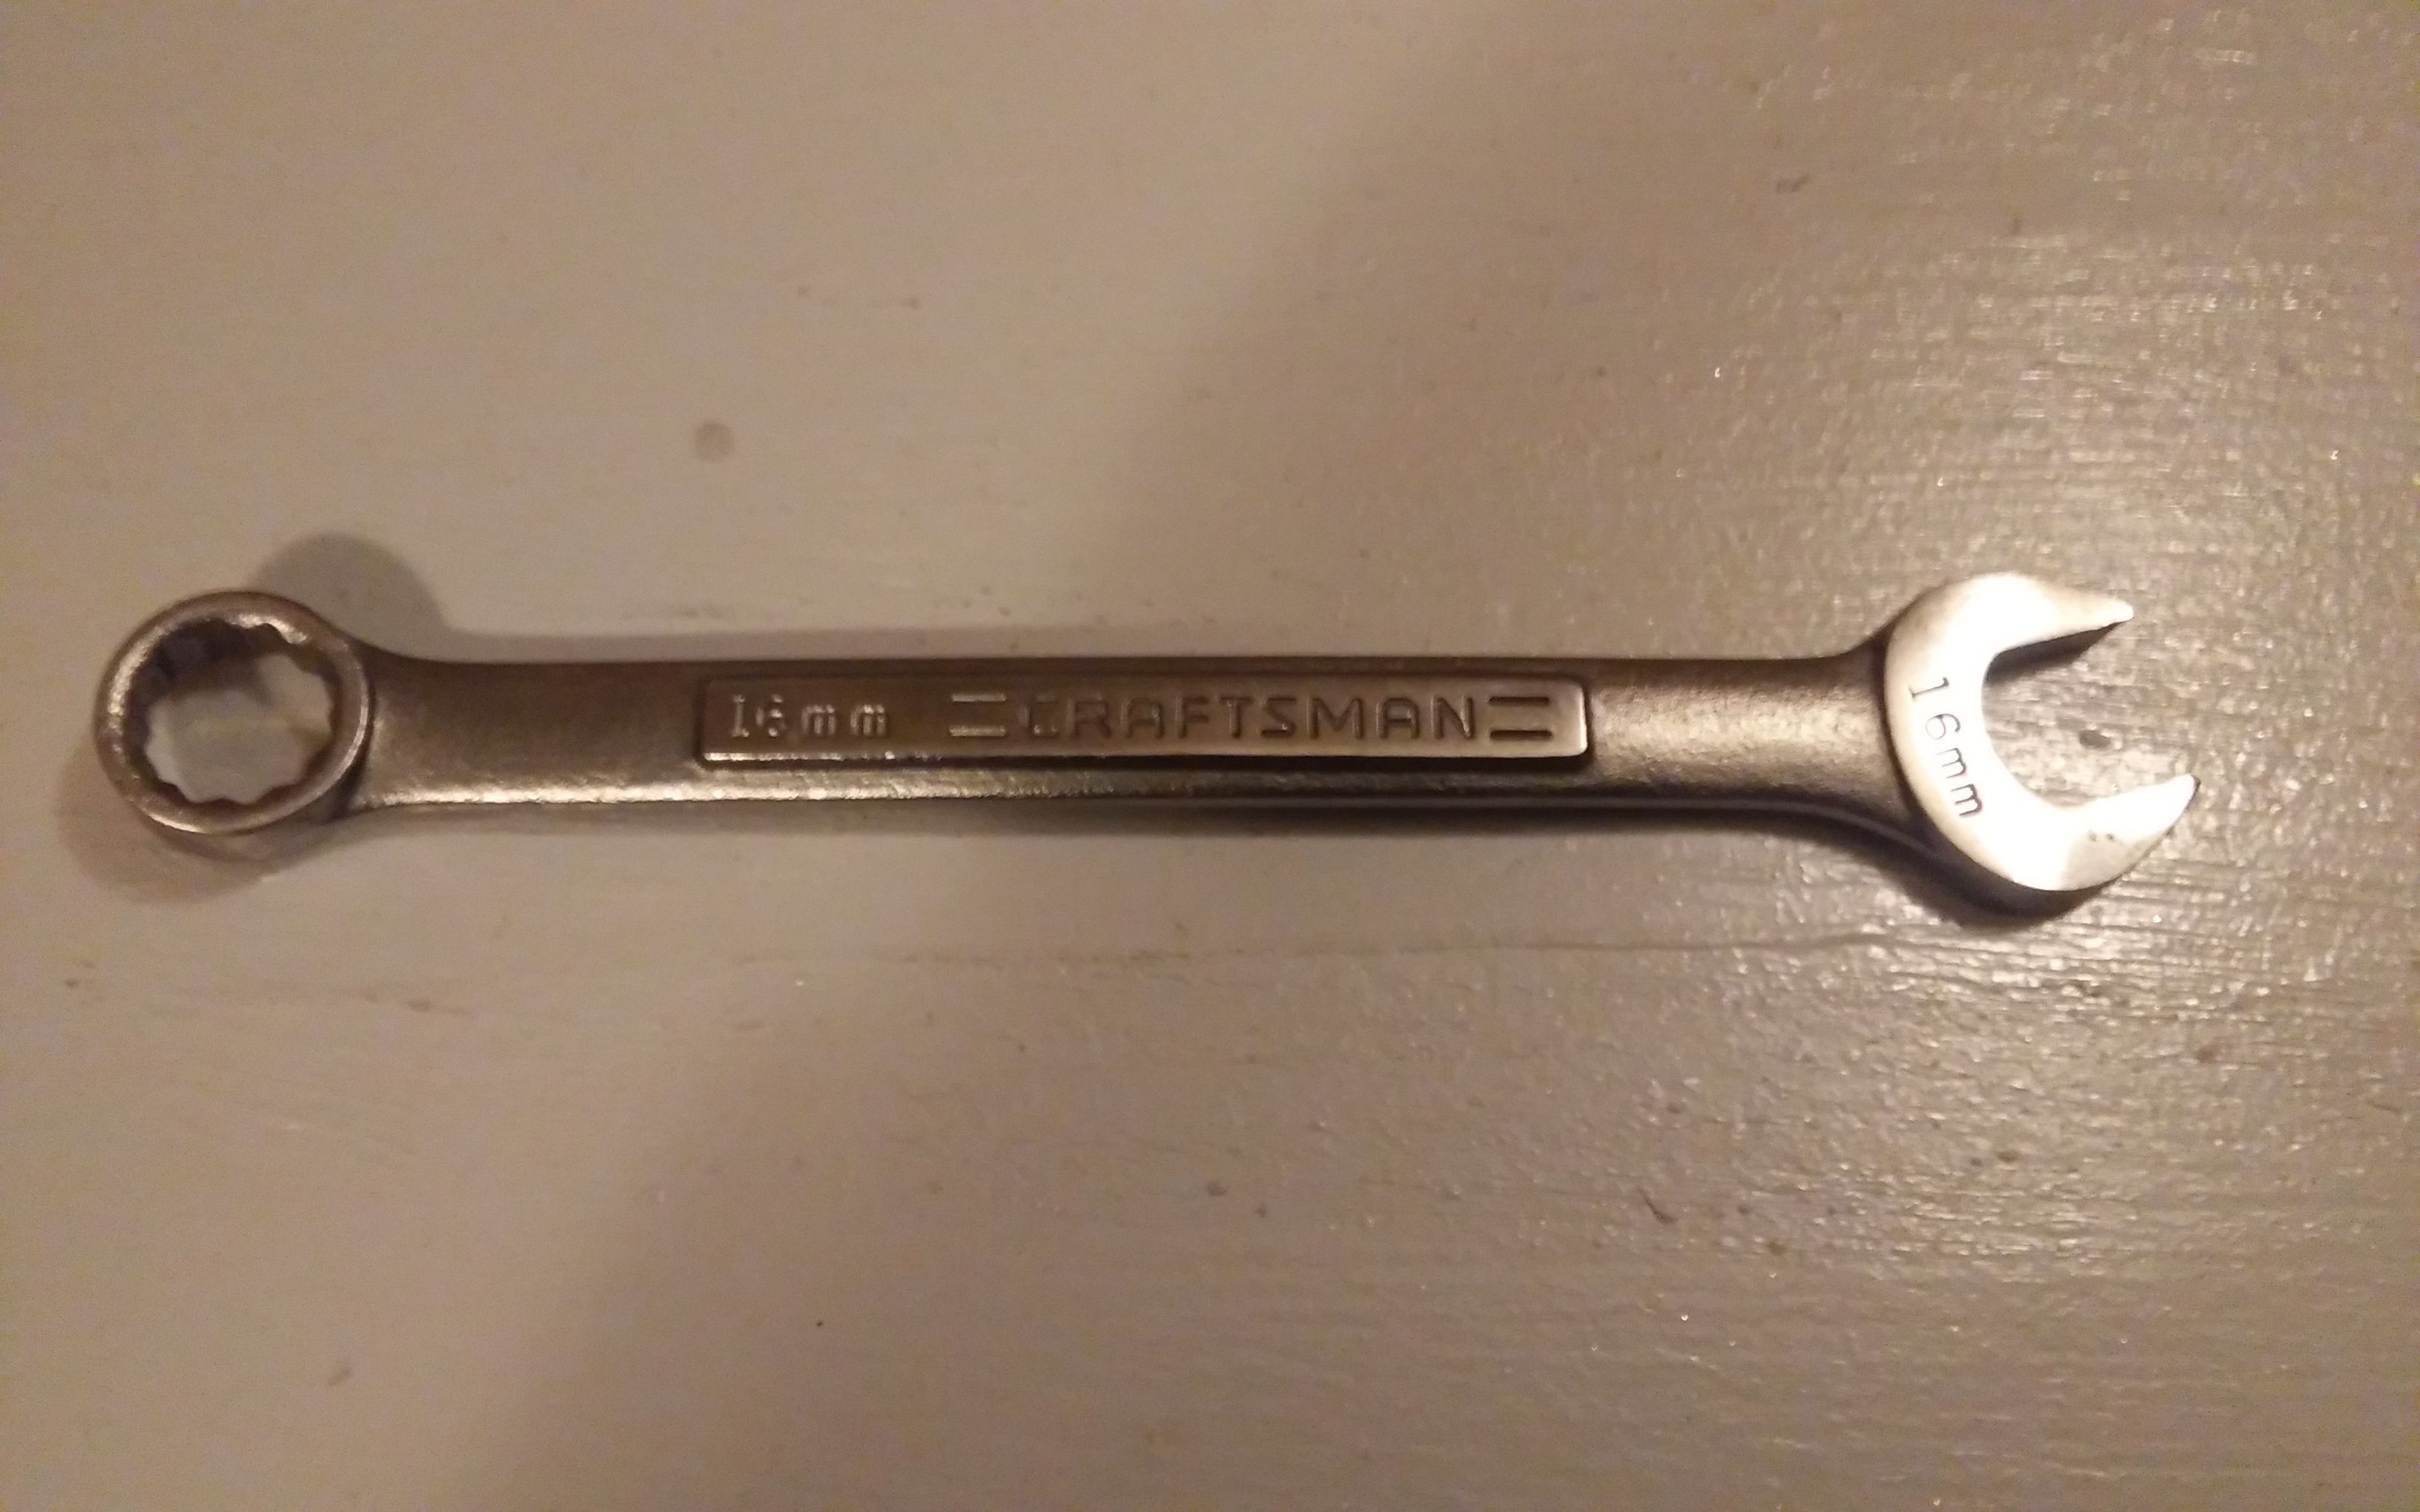 Used - Craftsman 16mm Wrench - 42924